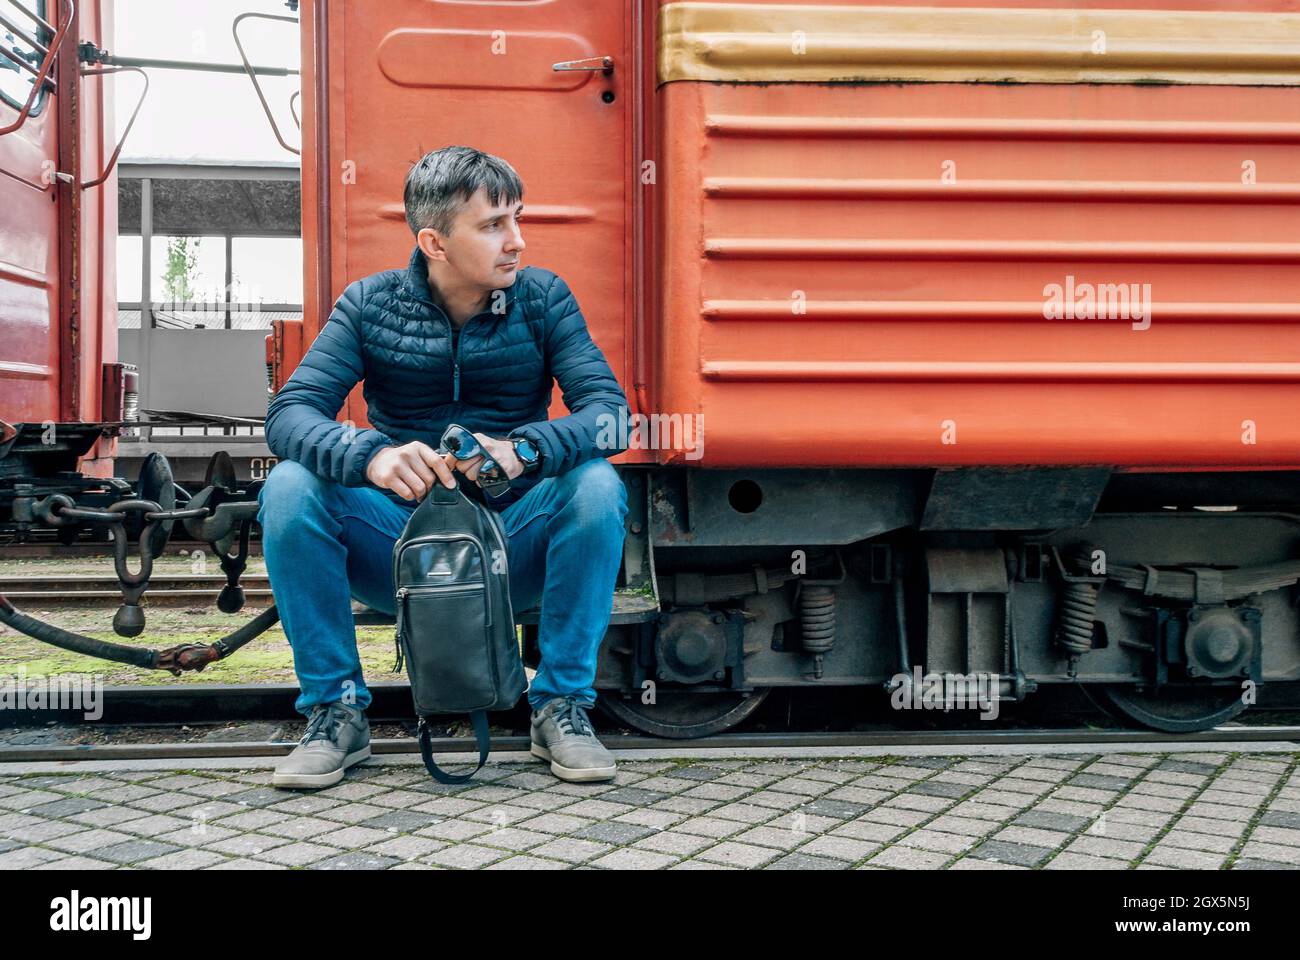 Man sits on the bandwagon of an old train, looks to the right Stock Photo